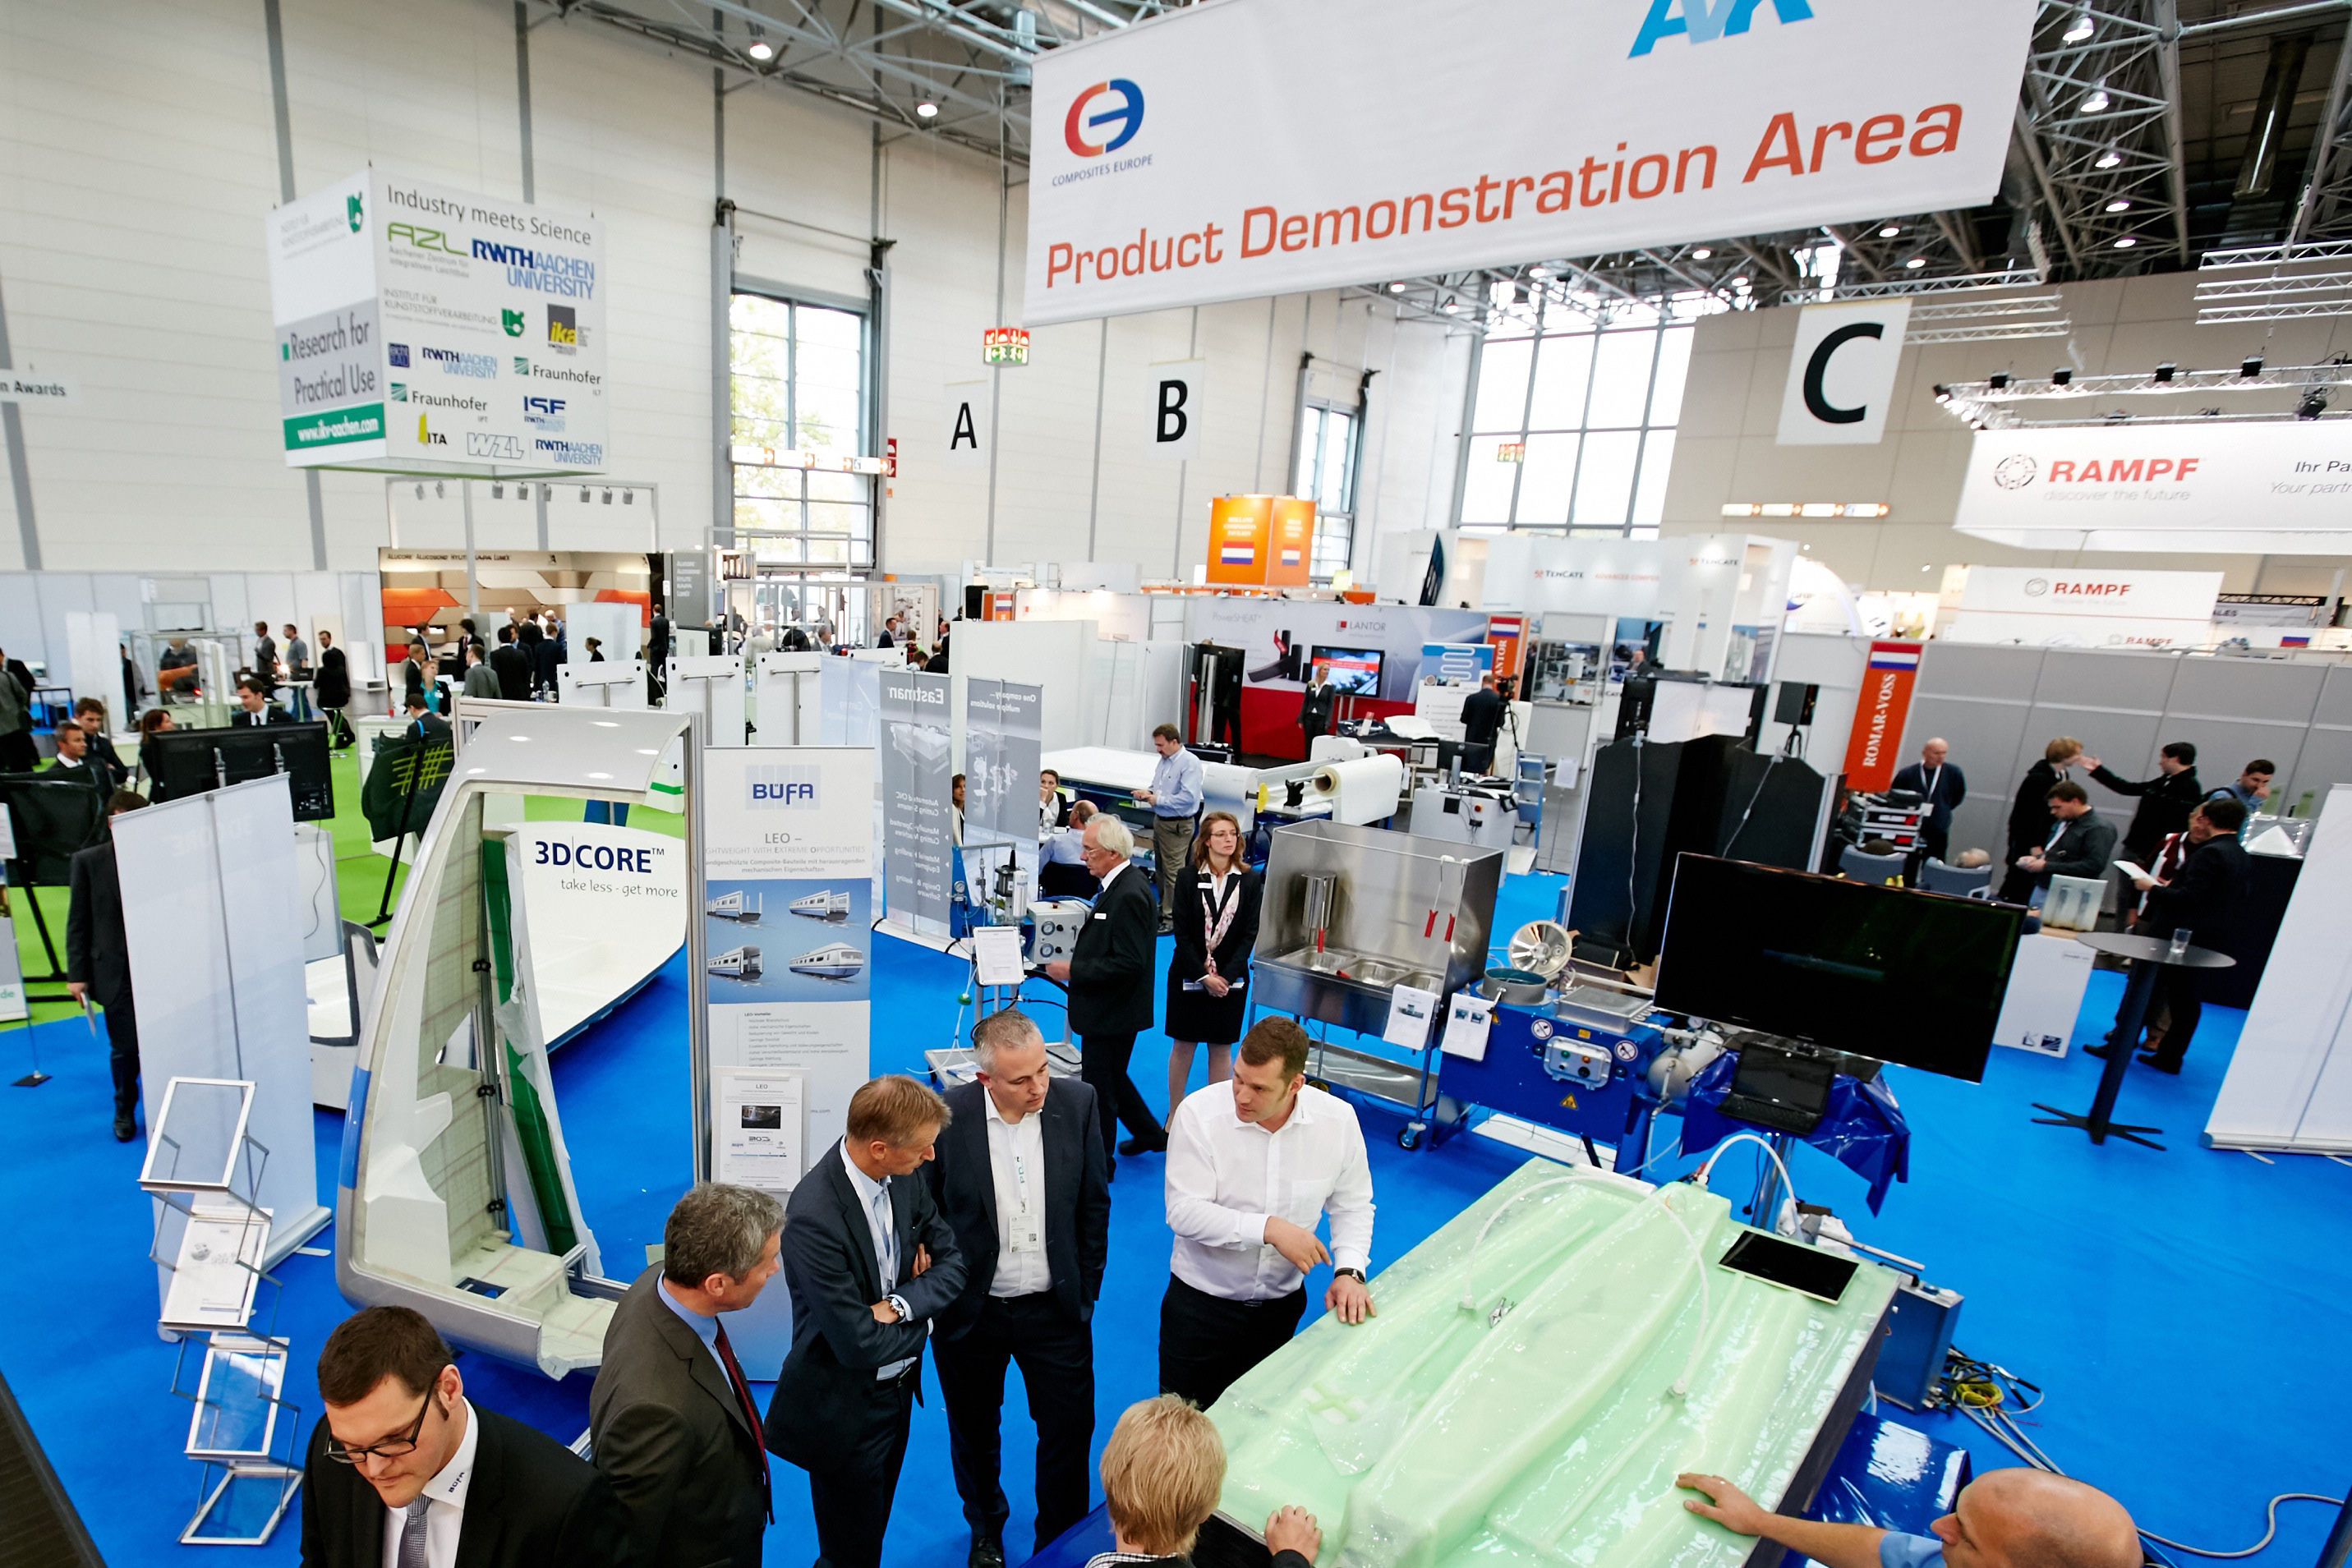 Product Demonstration Area at Composites Europe in 2014. © Composites Europe